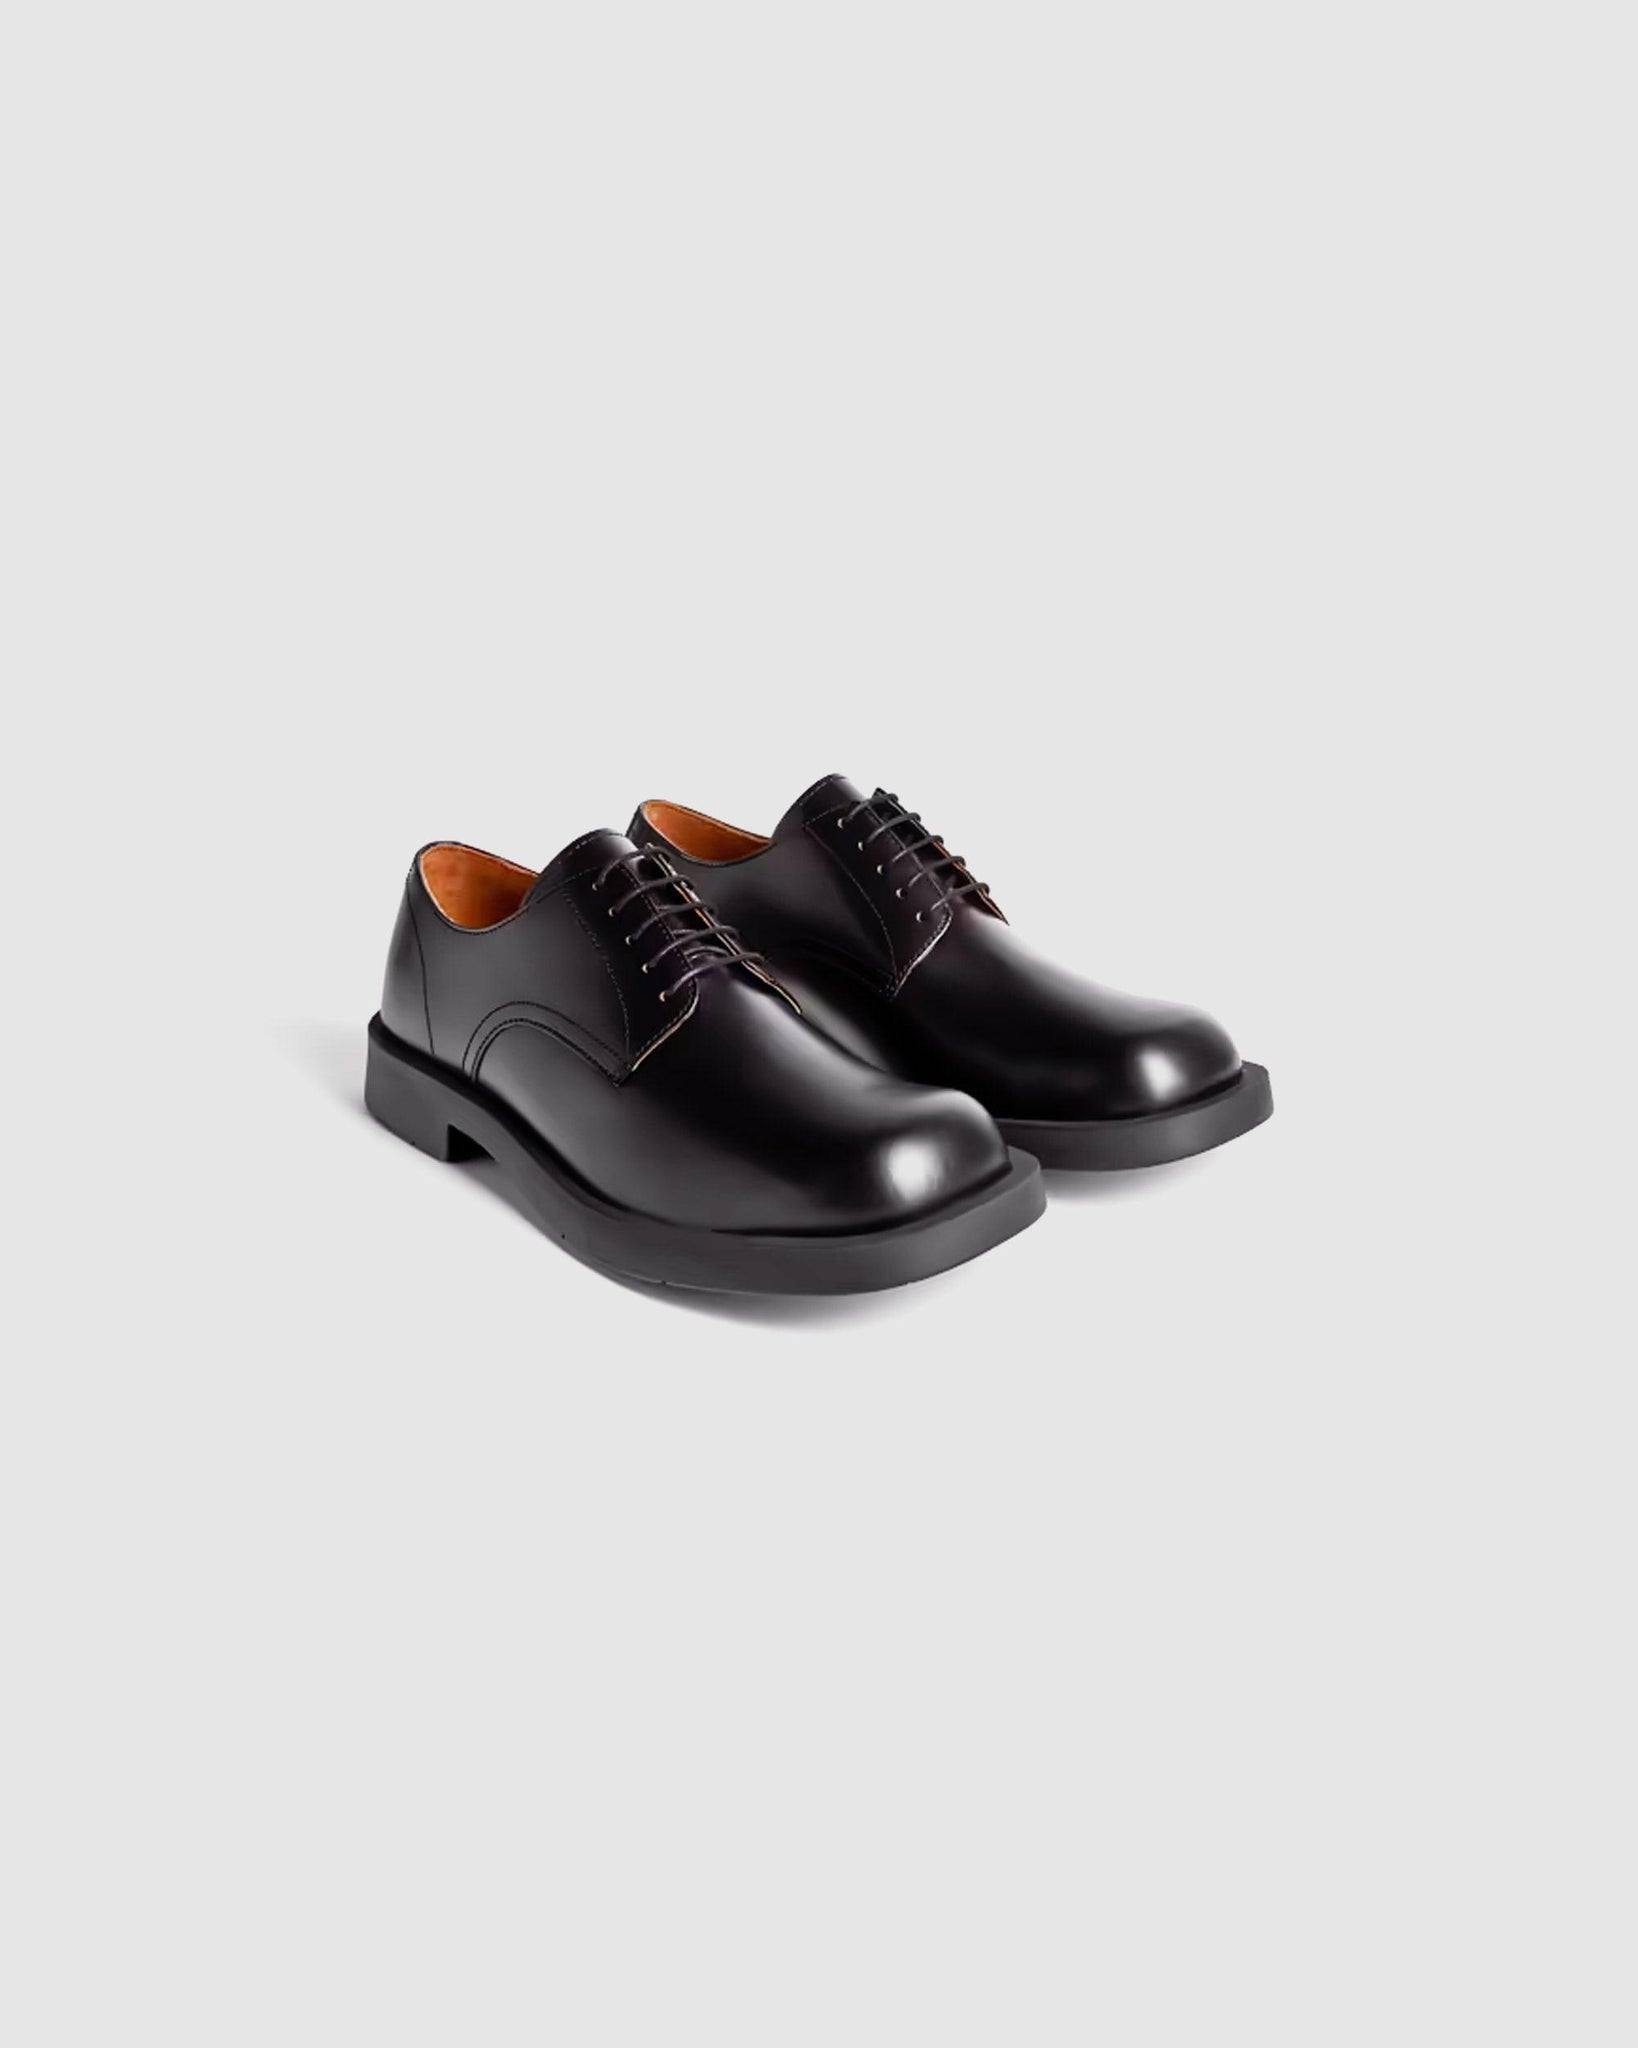 Mimi Black 1978 Leather Derbys - {{ collection.title }} - Chinatown Country Club 